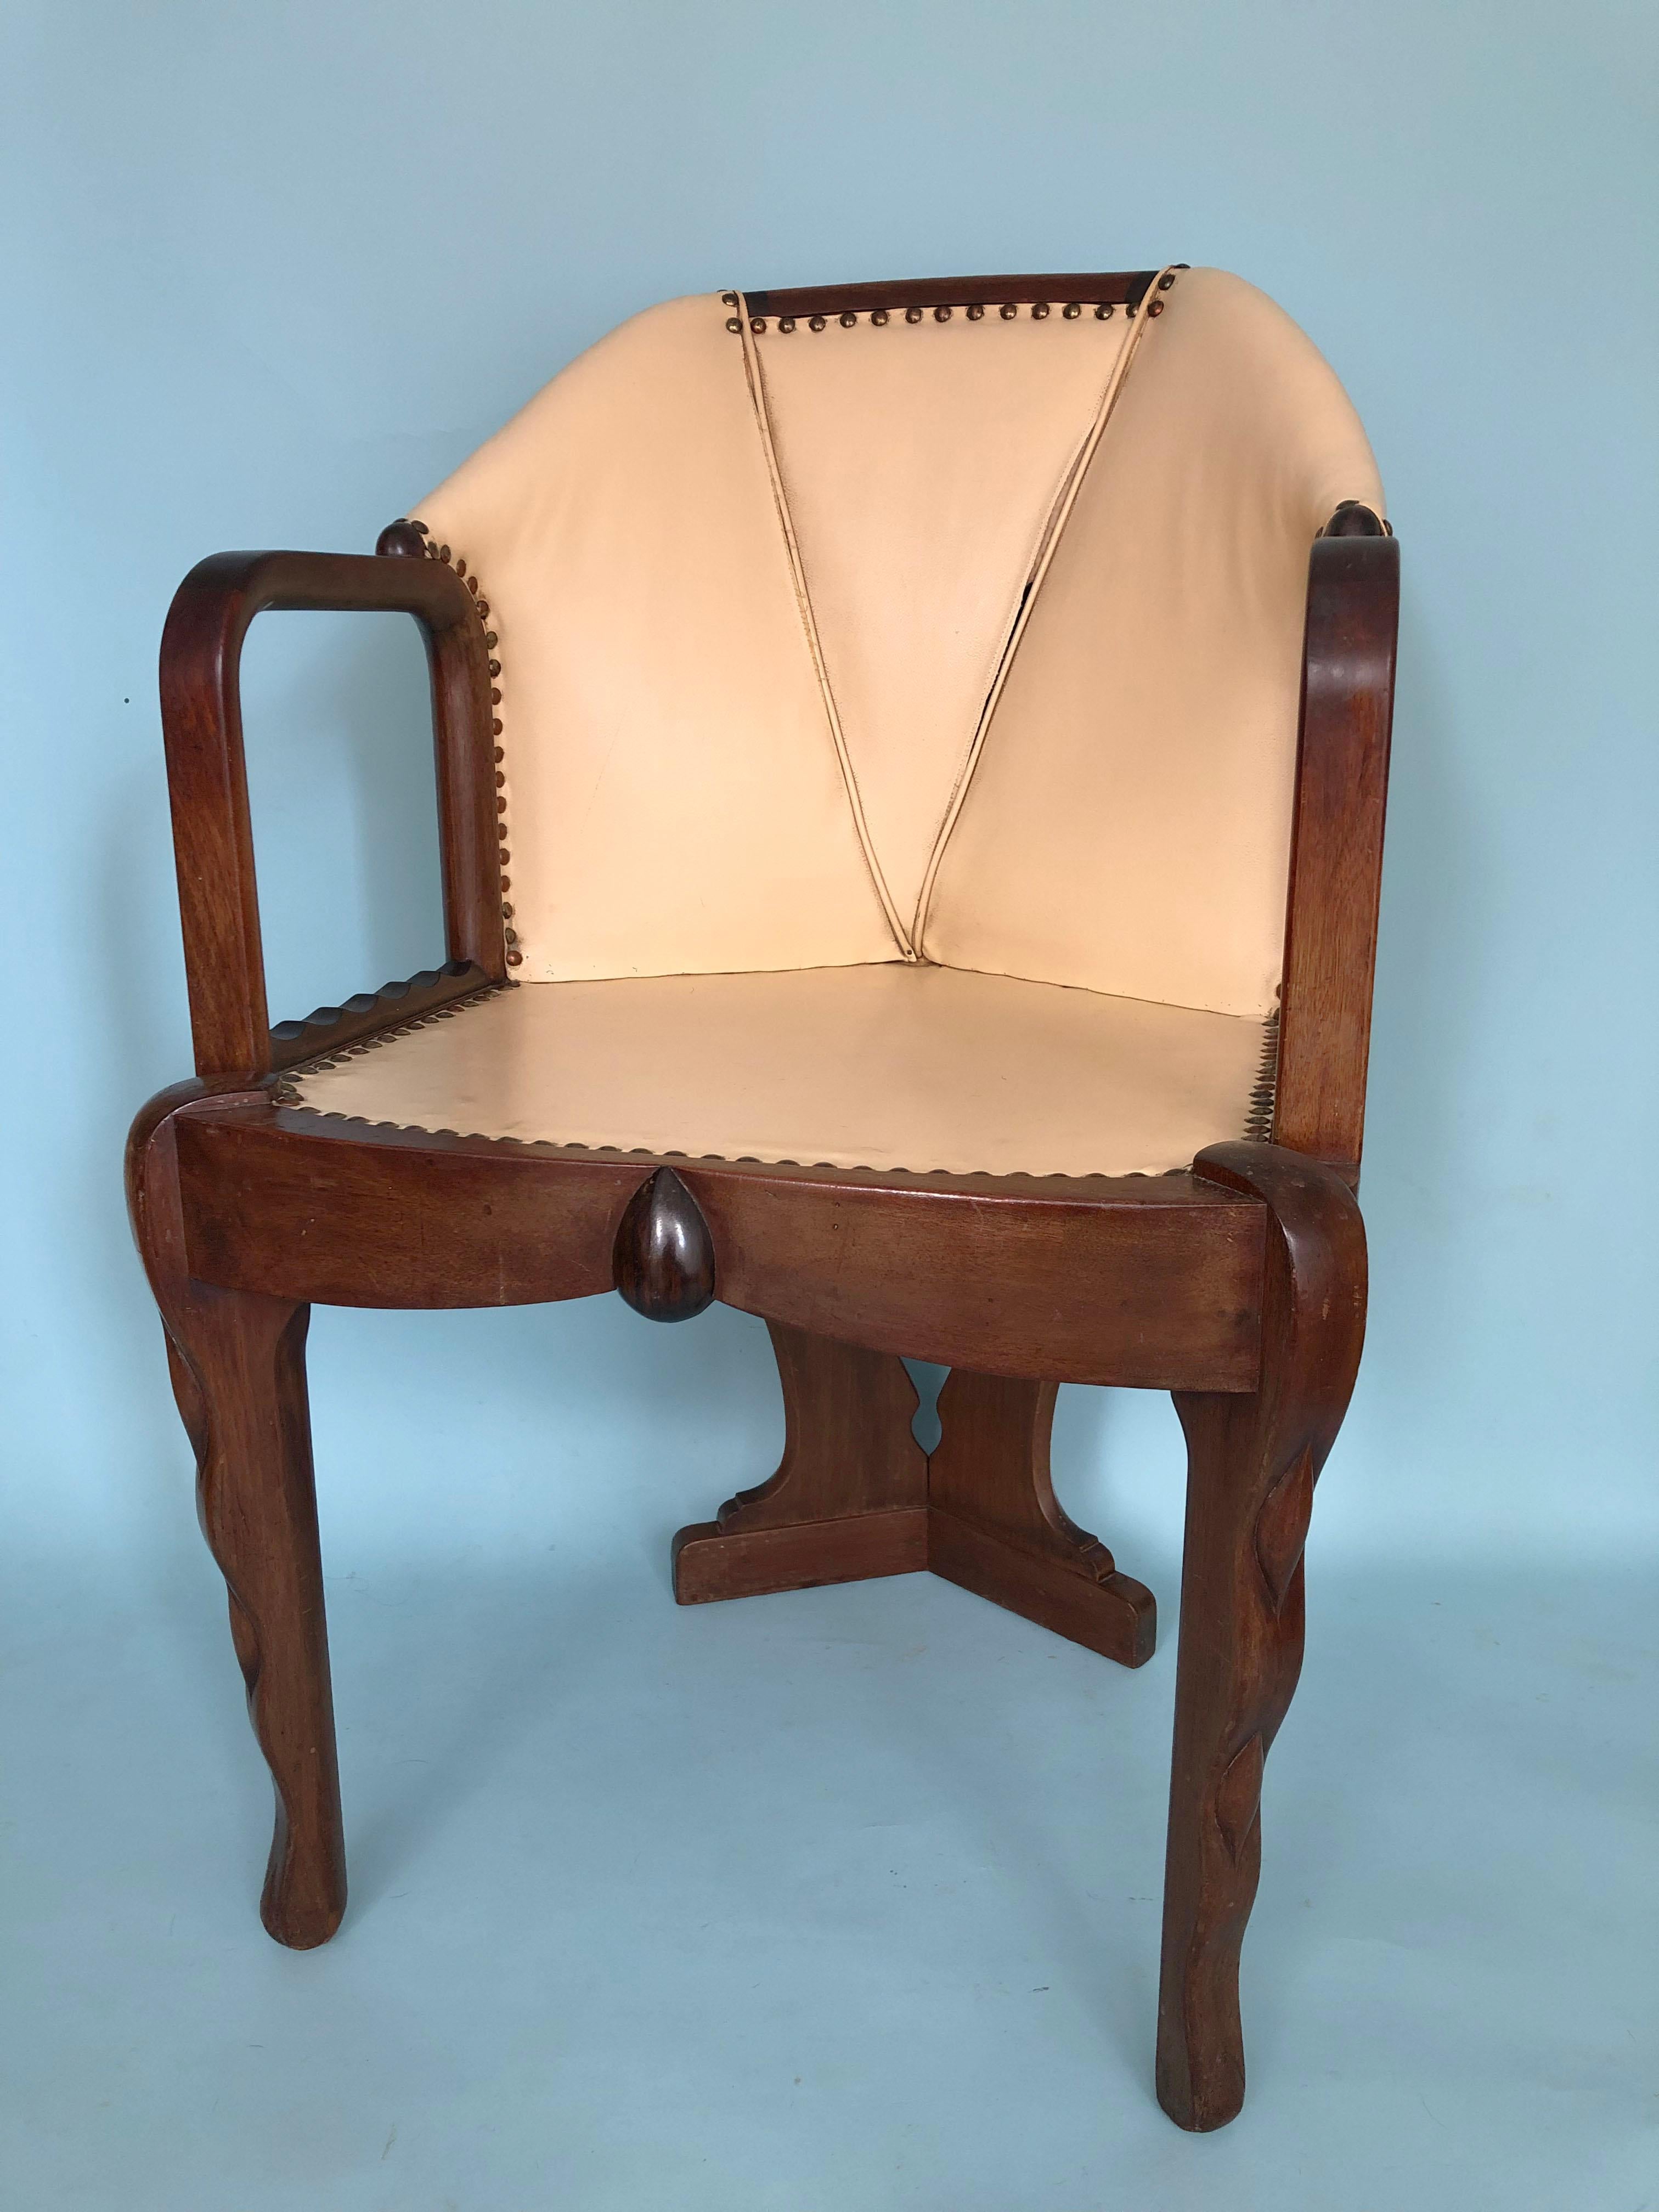 Extremely rare Amsterdam School tub chairs from the Art Deco period around 1920. These chairs resting on three legs that are in good condition were designed by Michiel de Klerk van ‘t Woonhuys Furniture. A unique design. The chairs are upholstered